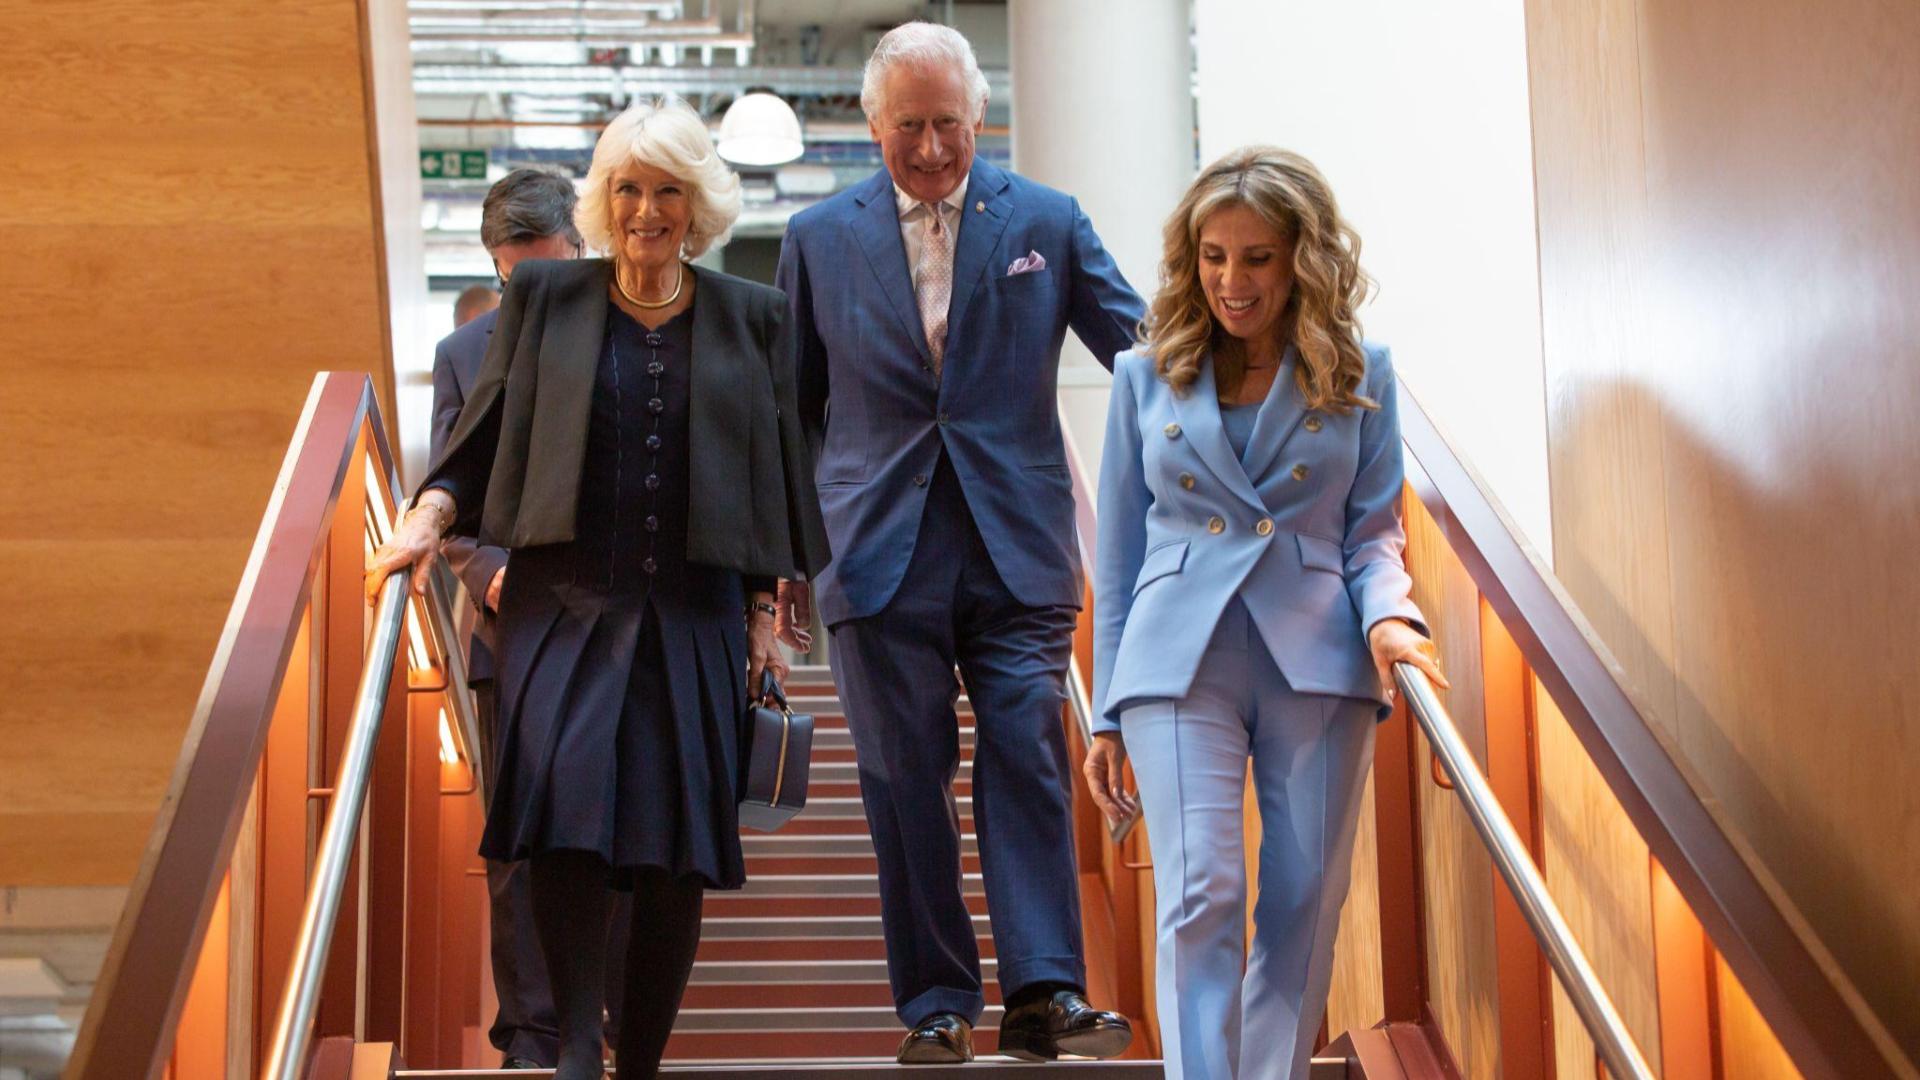 Their Royal Highnesses The Prince of Wales and The Duchess of Cornwall walking down the stairs with Nicola Mendelsohn